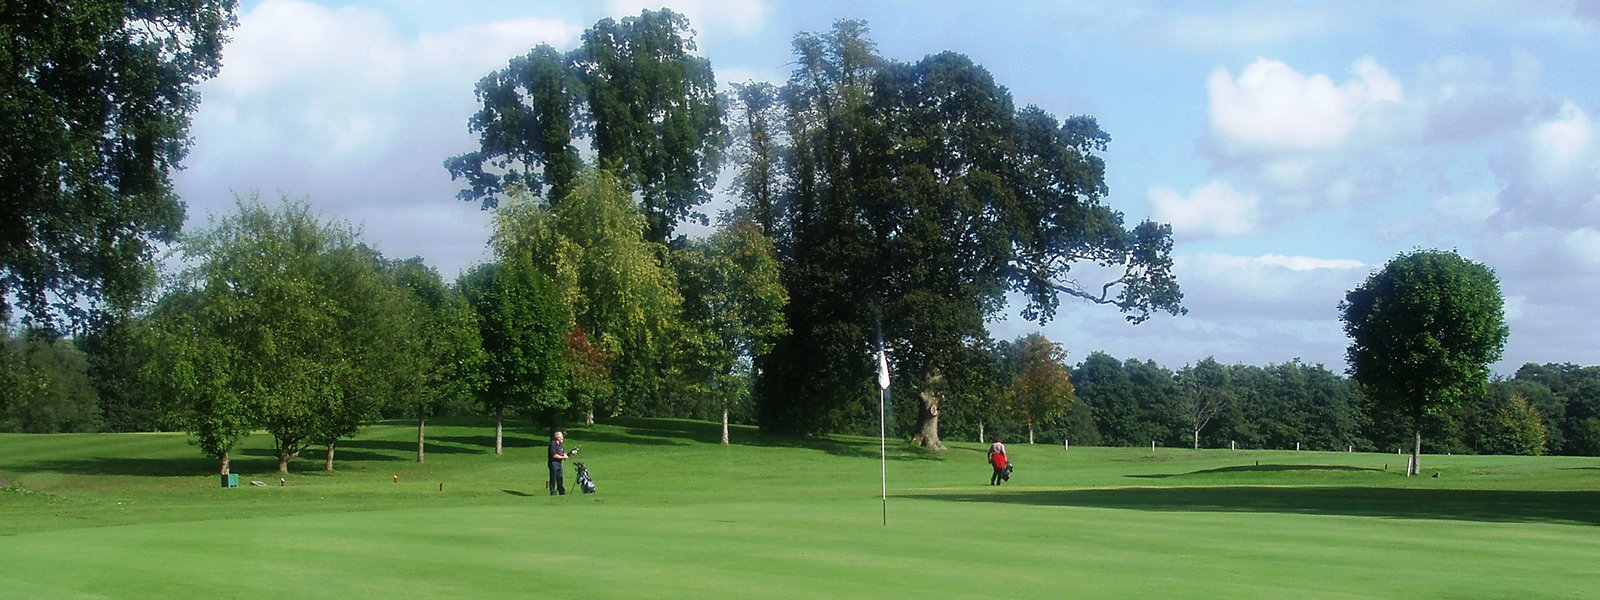 Golf course at Ross Priory